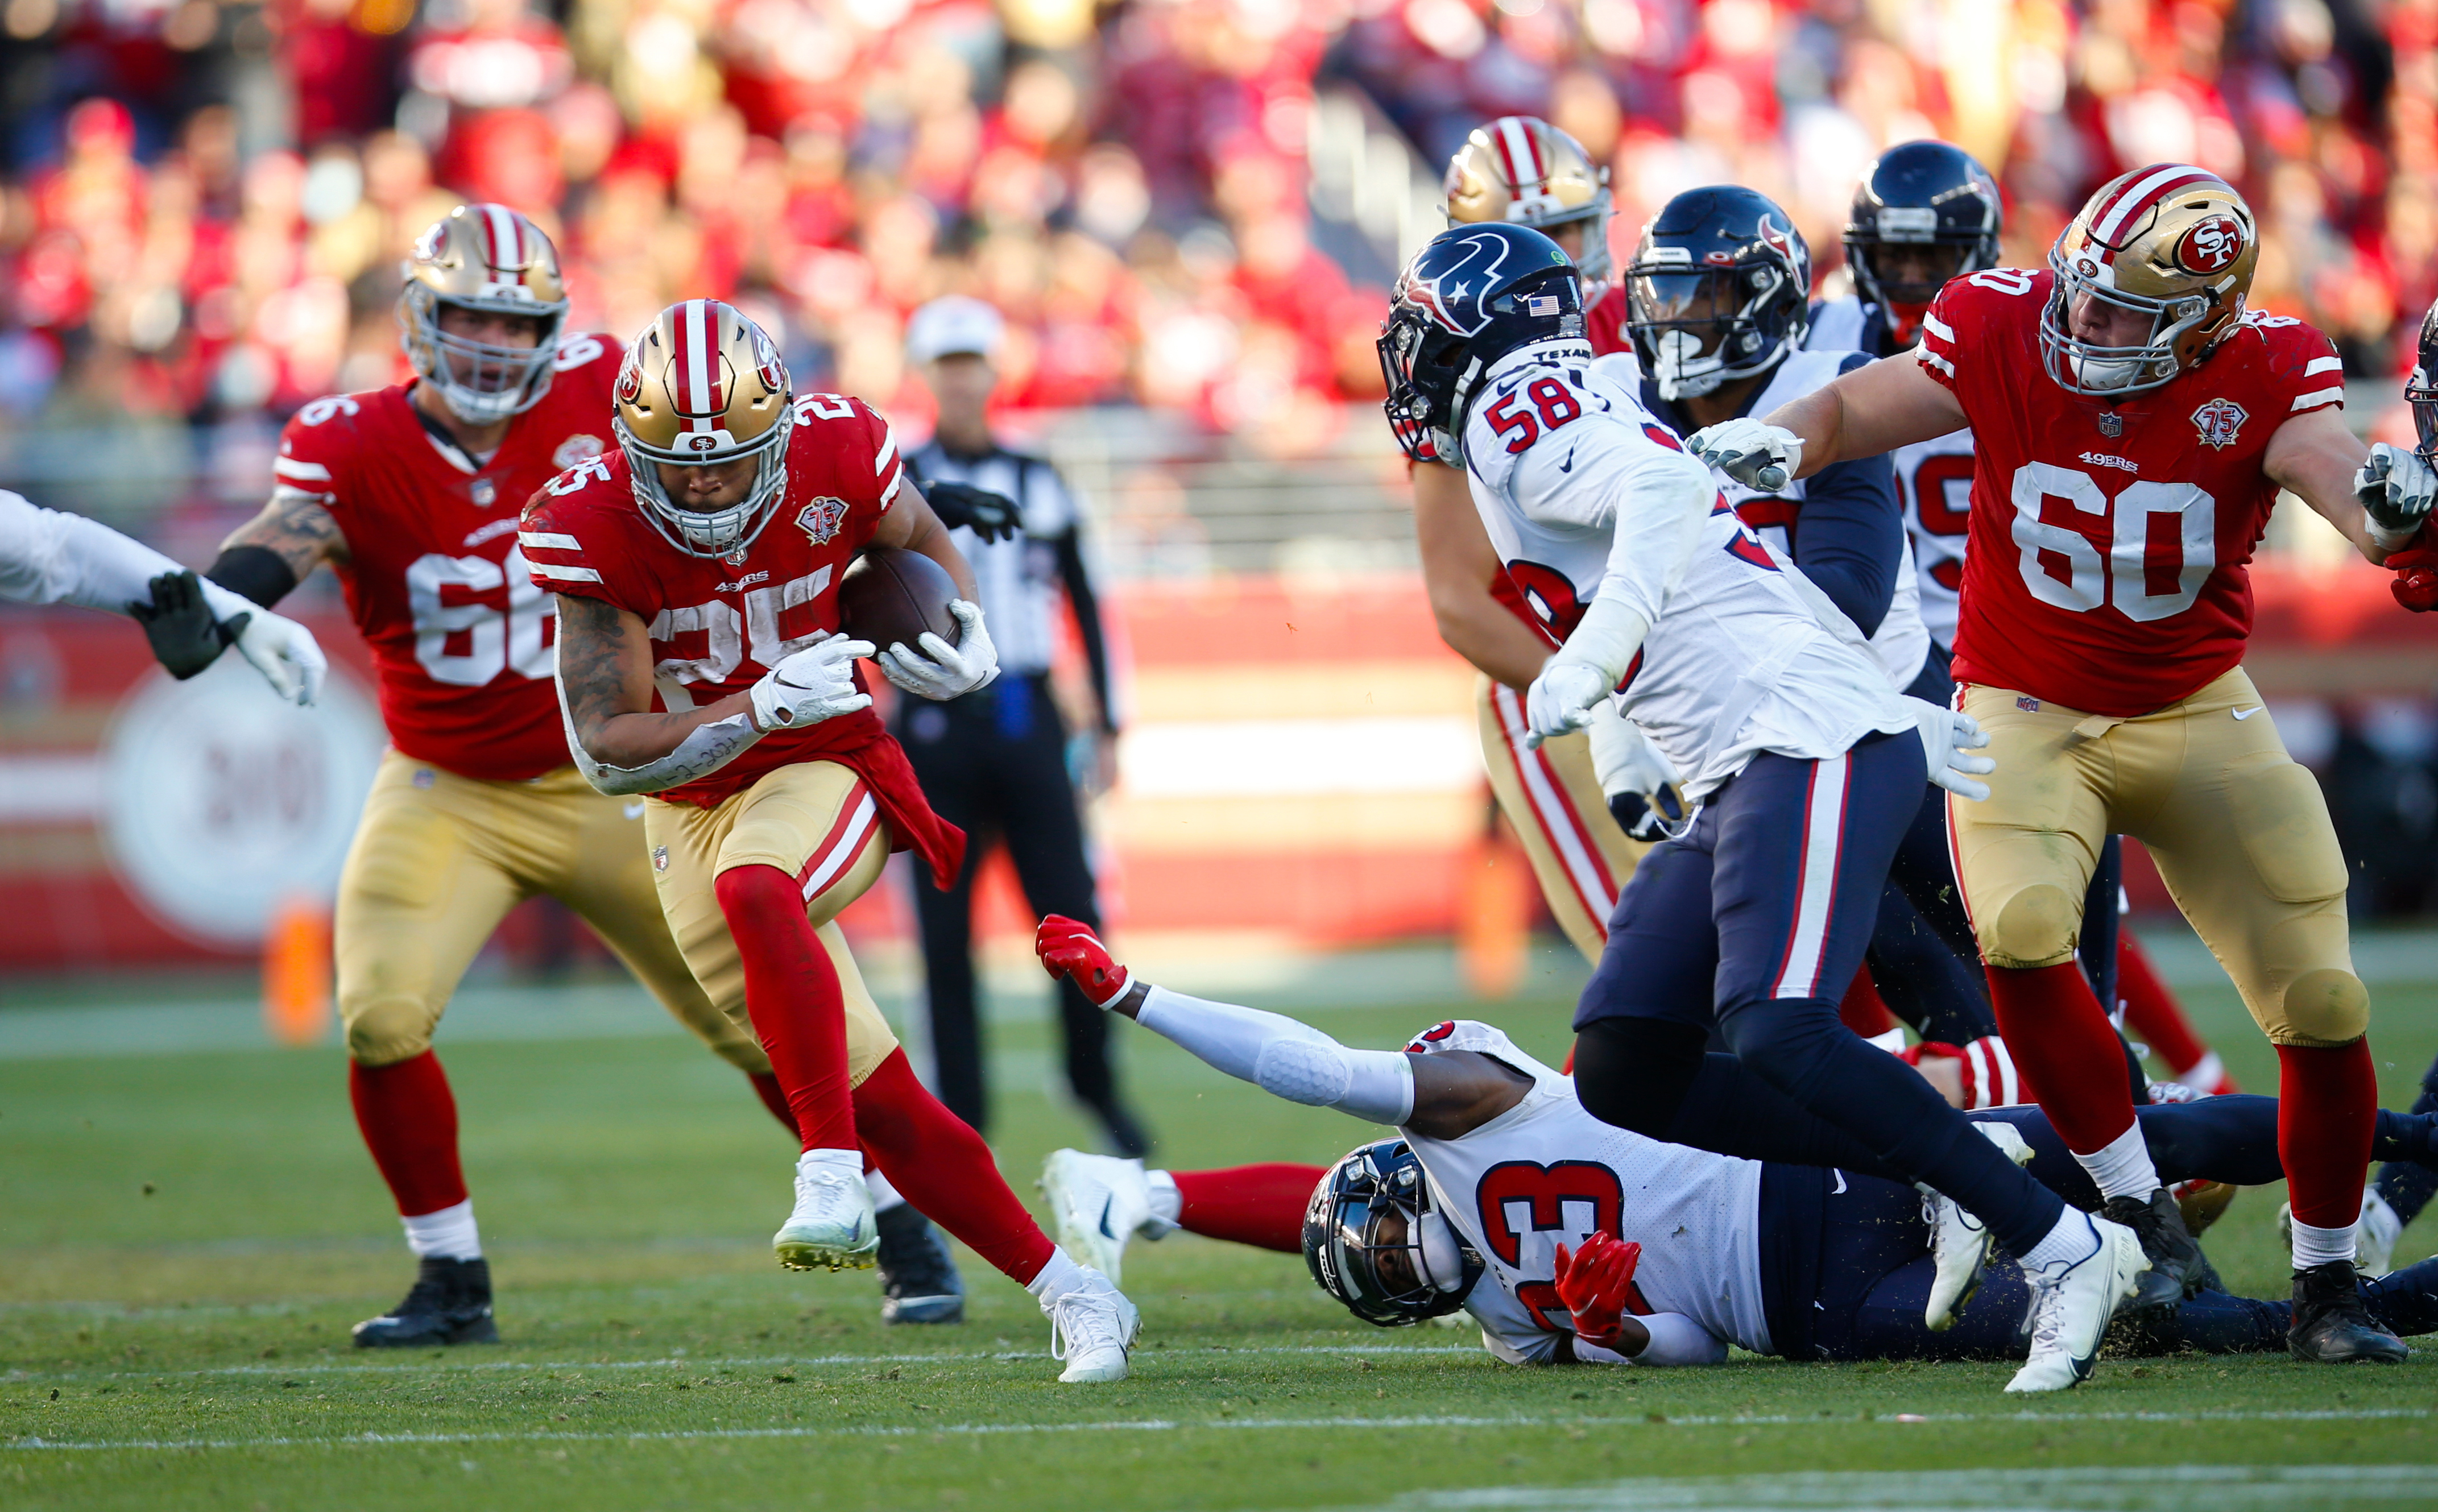 The San Francisco 49ers clinch a Wild Card berth with a win Sunday